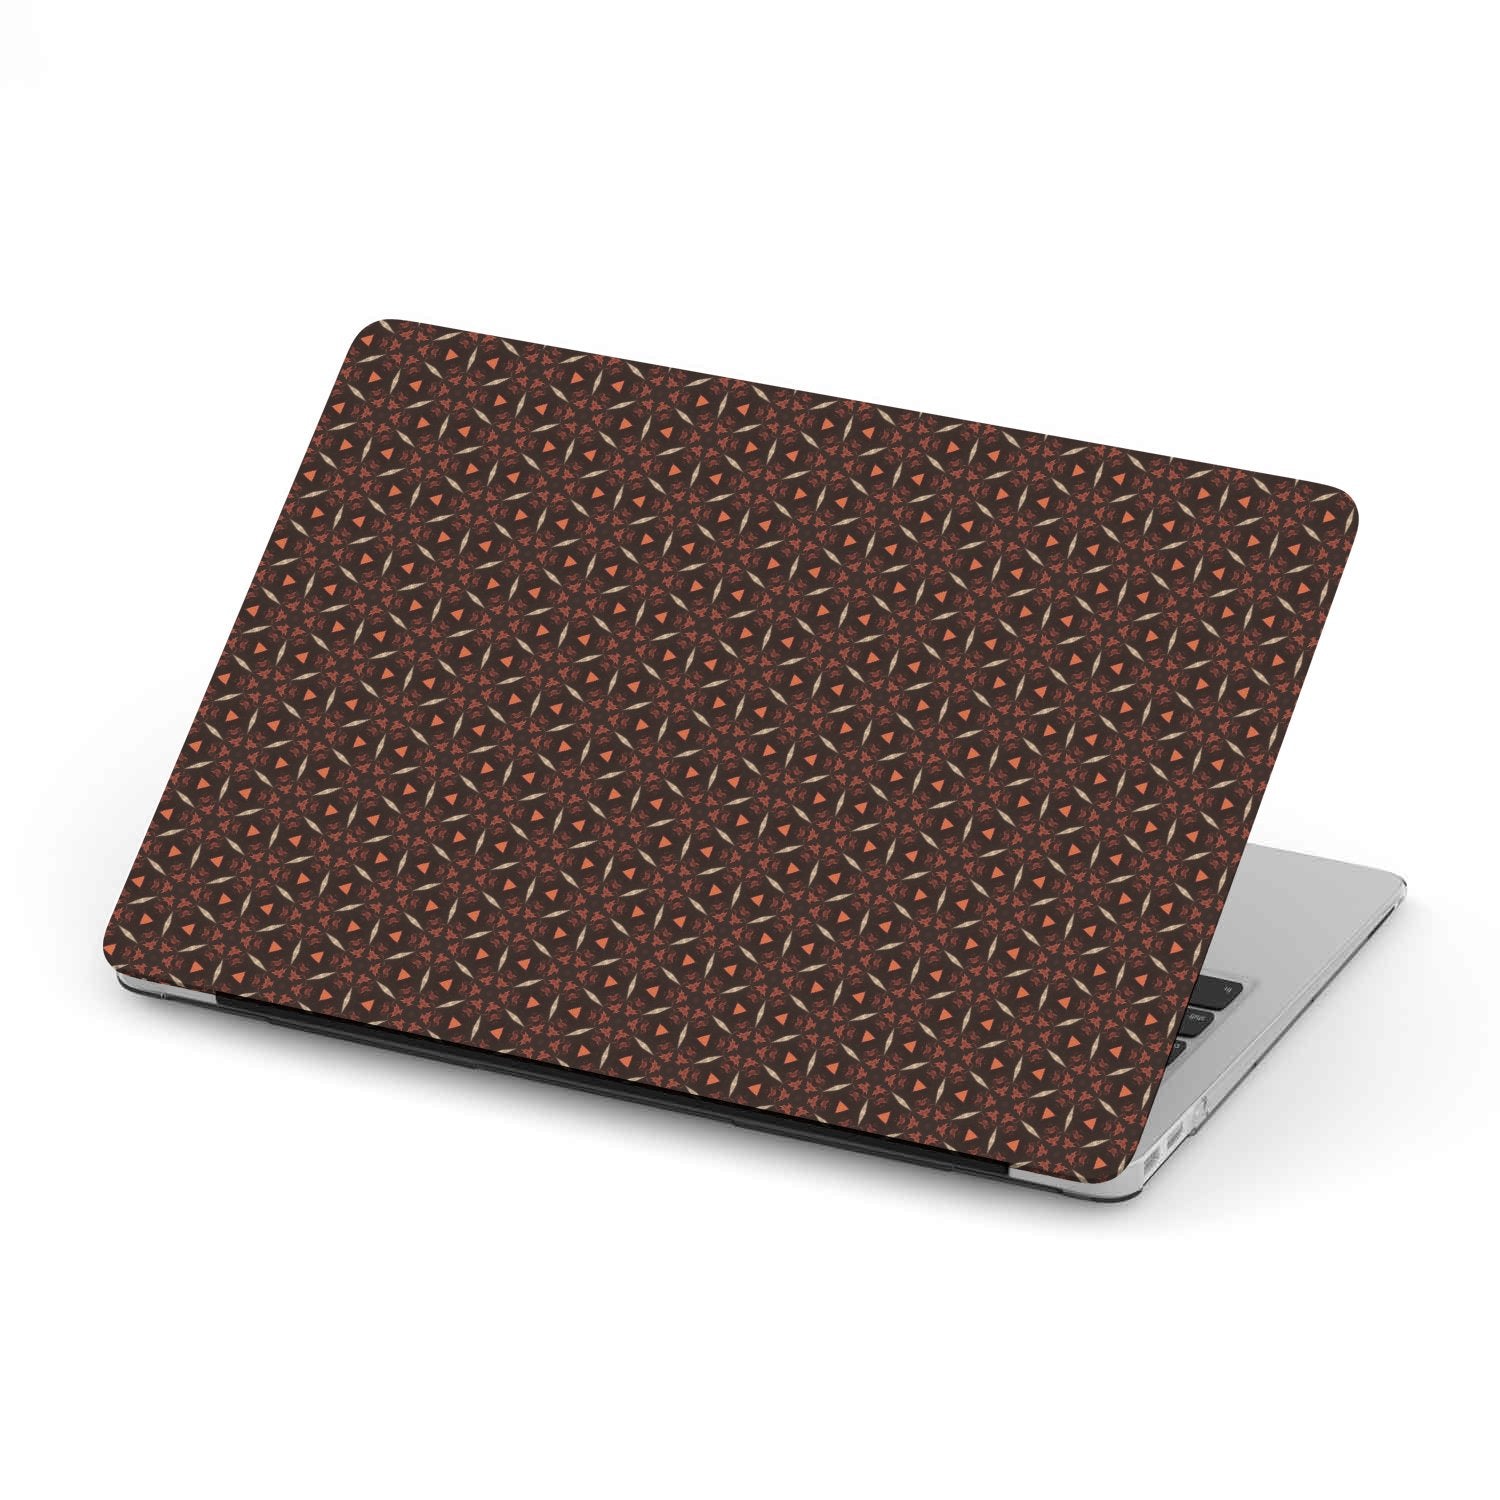 Traditional Indian Motif 4 MacBook Cover